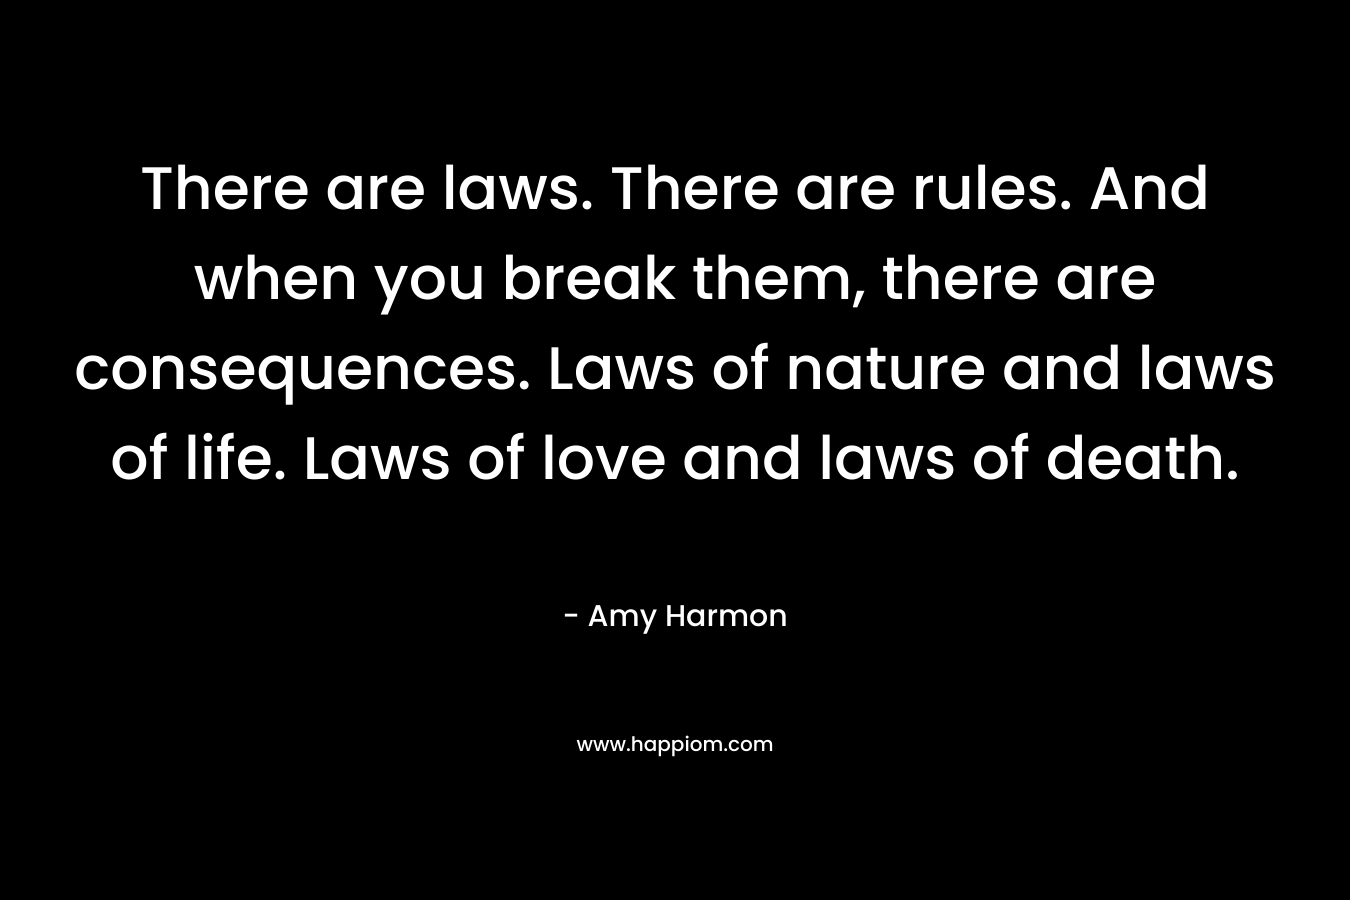 There are laws. There are rules. And when you break them, there are consequences. Laws of nature and laws of life. Laws of love and laws of death. – Amy Harmon